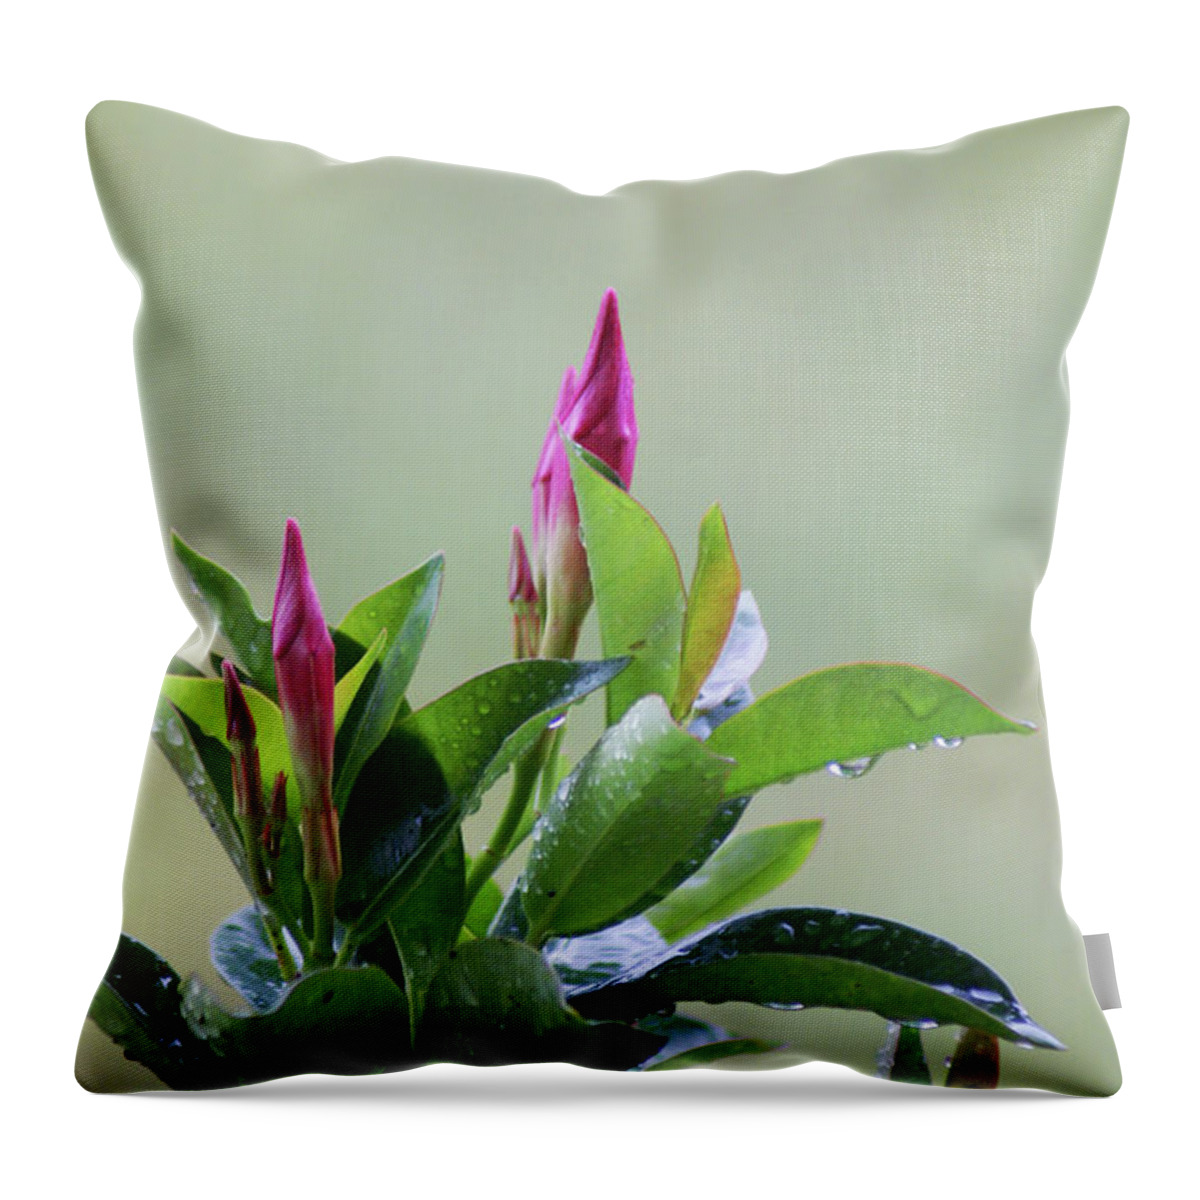  Throw Pillow featuring the photograph Mandevilla Drops by Heather E Harman